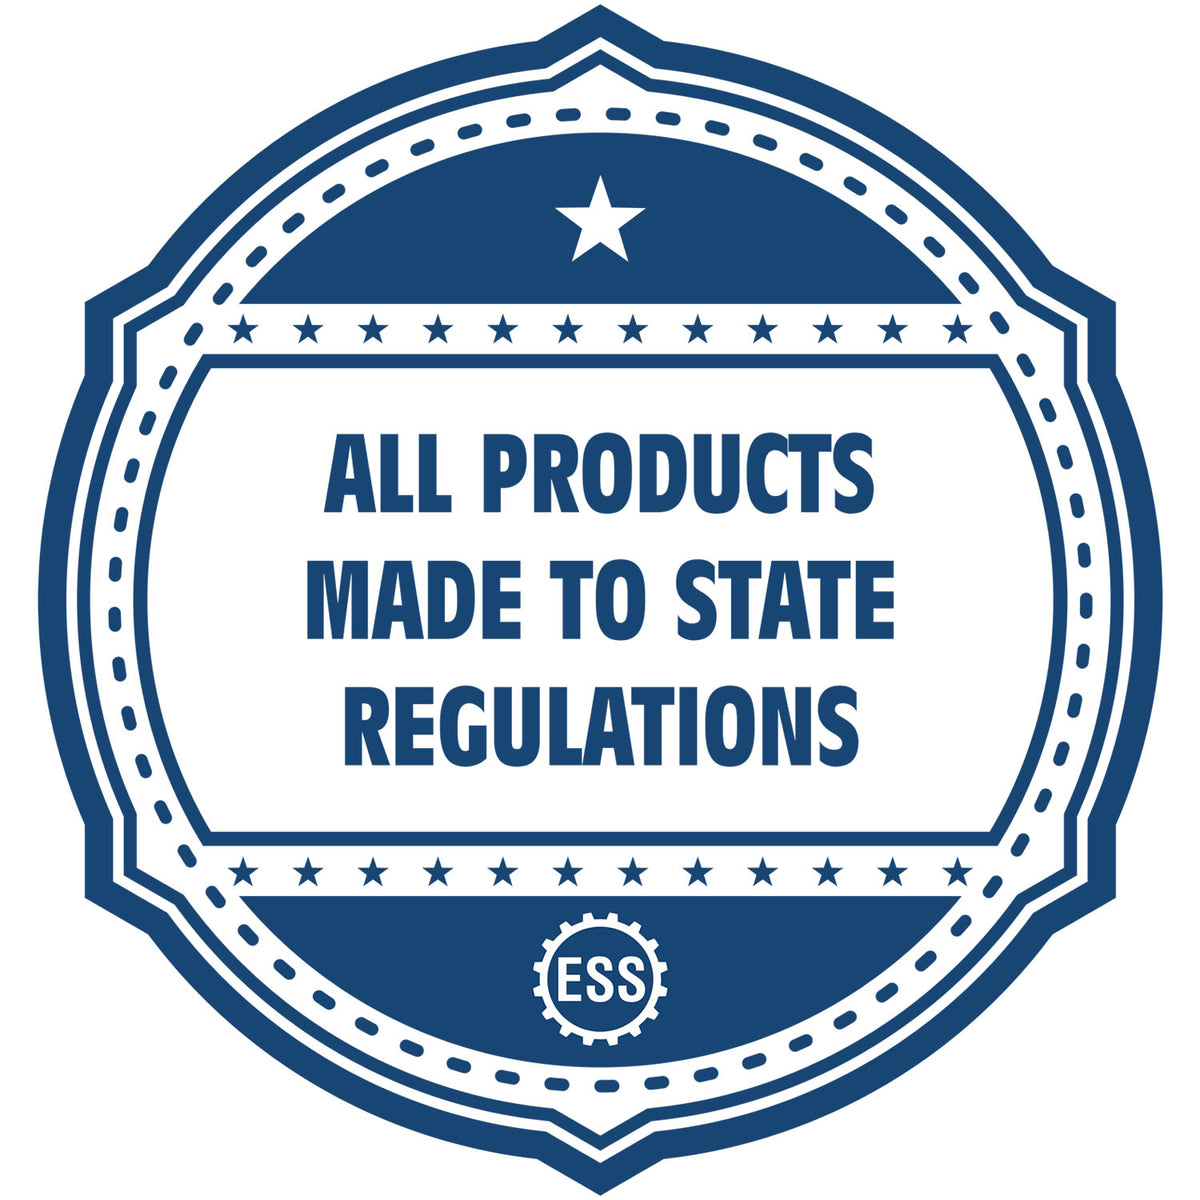 A blue icon or badge for the Hybrid New York Engineer Seal showing that this product is made in compliance with state regulations.